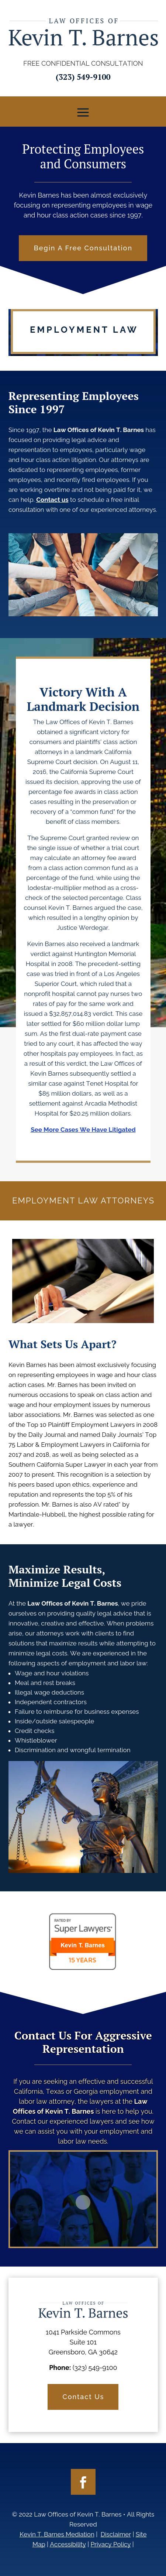 Law Offices of Kevin T. Barnes - Los Angeles CA Lawyers